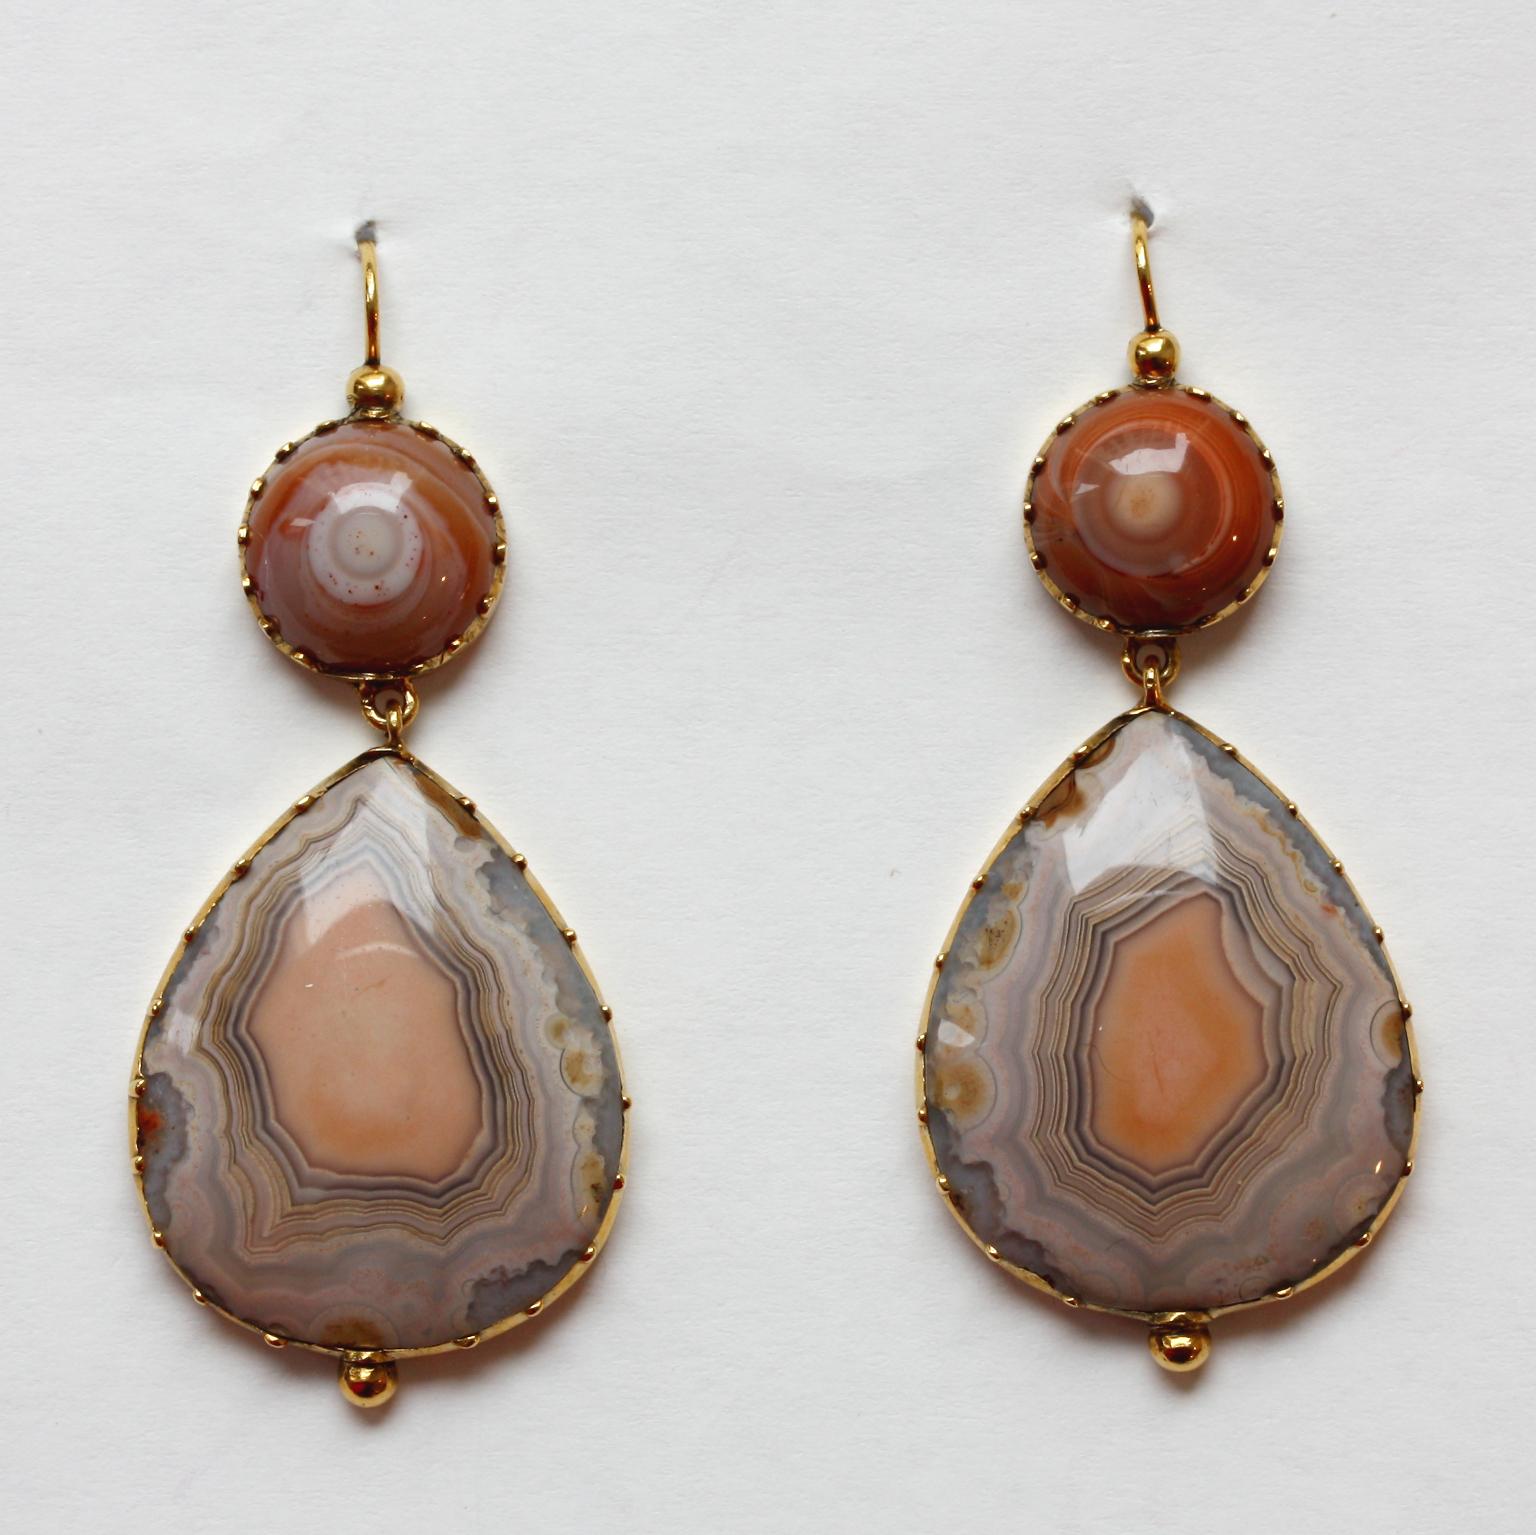 A pair of gold earrings with natural agate drops under a cabochon round agate in light brown, red and orange hues, England, early 19th century.

weight: 9.62 gram.
dimensions: 5.0 x 2.0 cm.